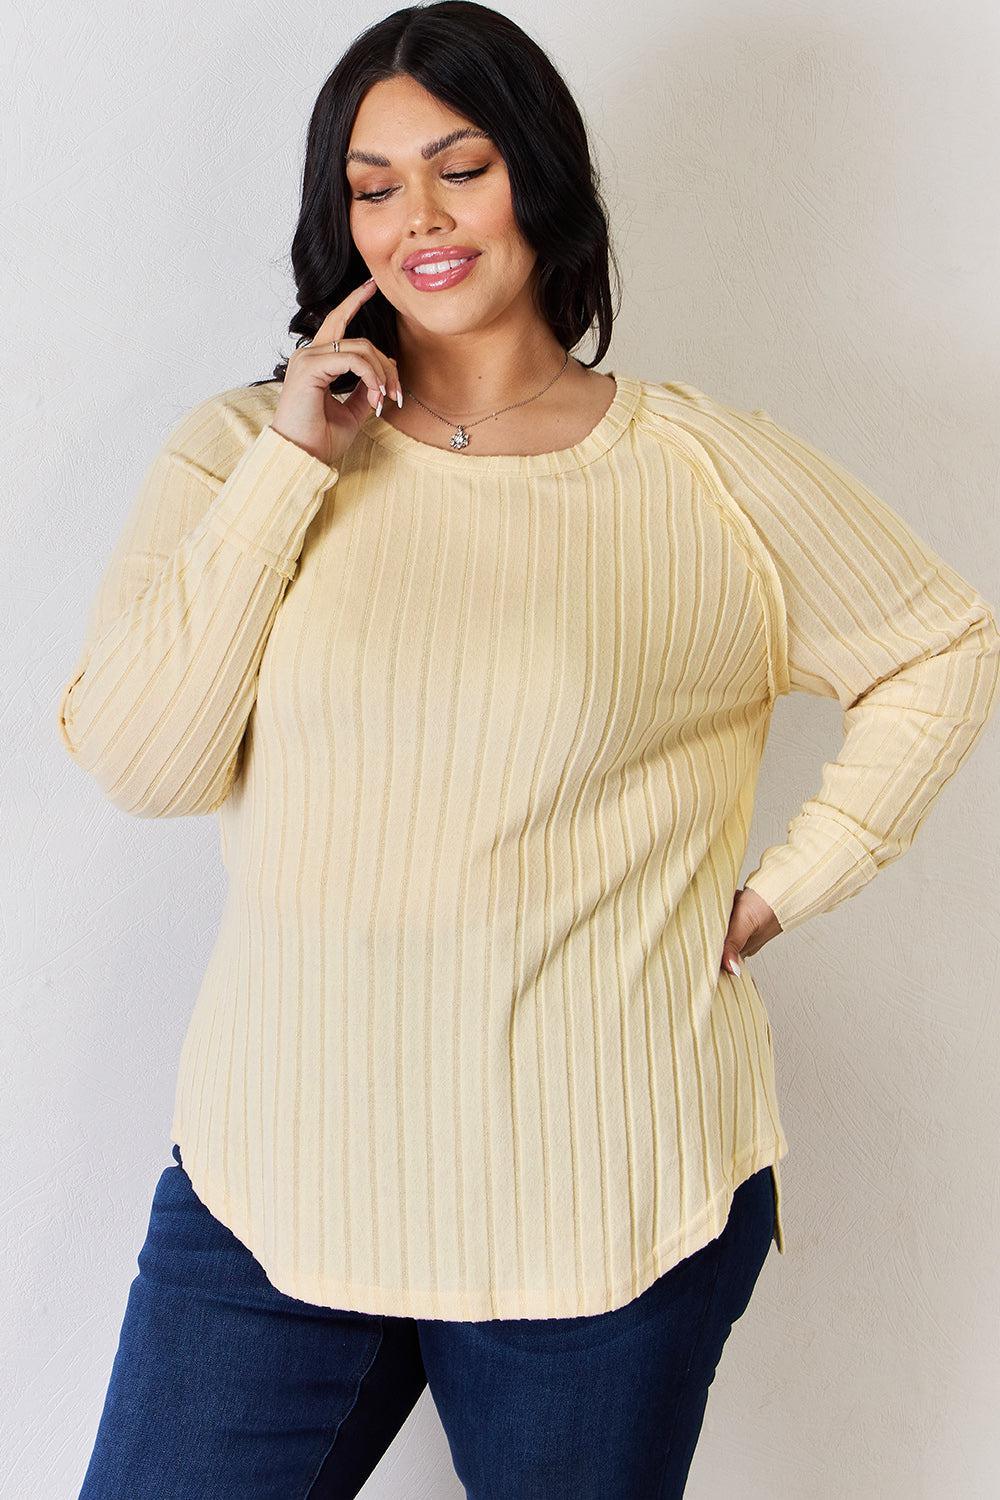 a woman in a yellow sweater talking on a cell phone